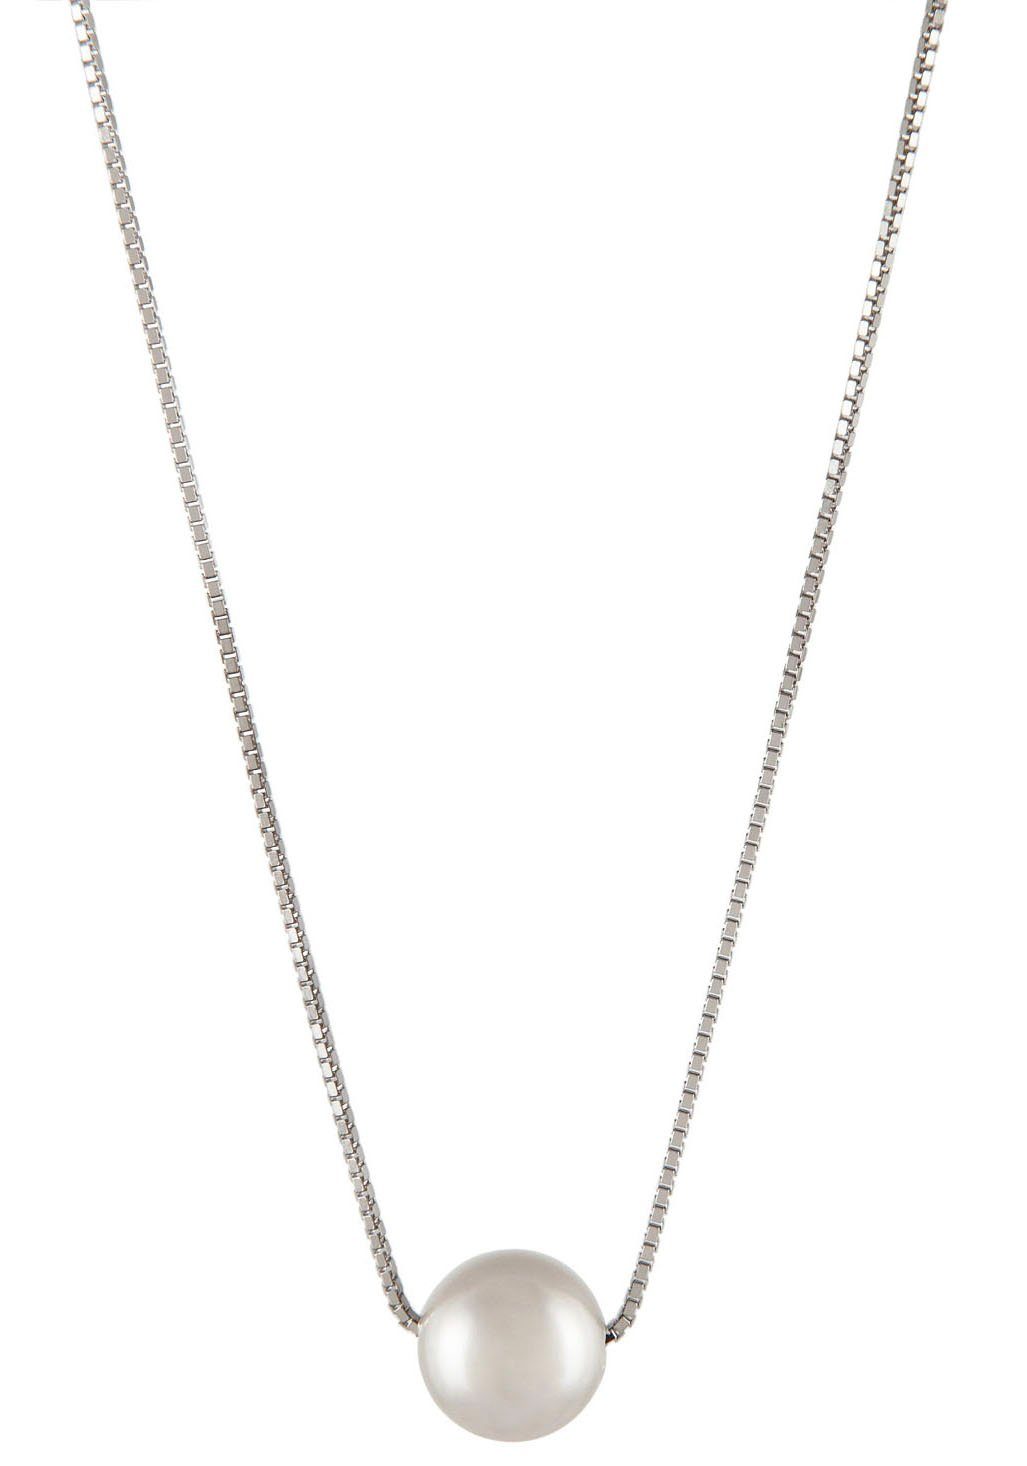 UNIKE JEWELLERY Kette mit Anhänger CLASSY PEARL, UK.CL.1202.0014, mit Perle (synth)